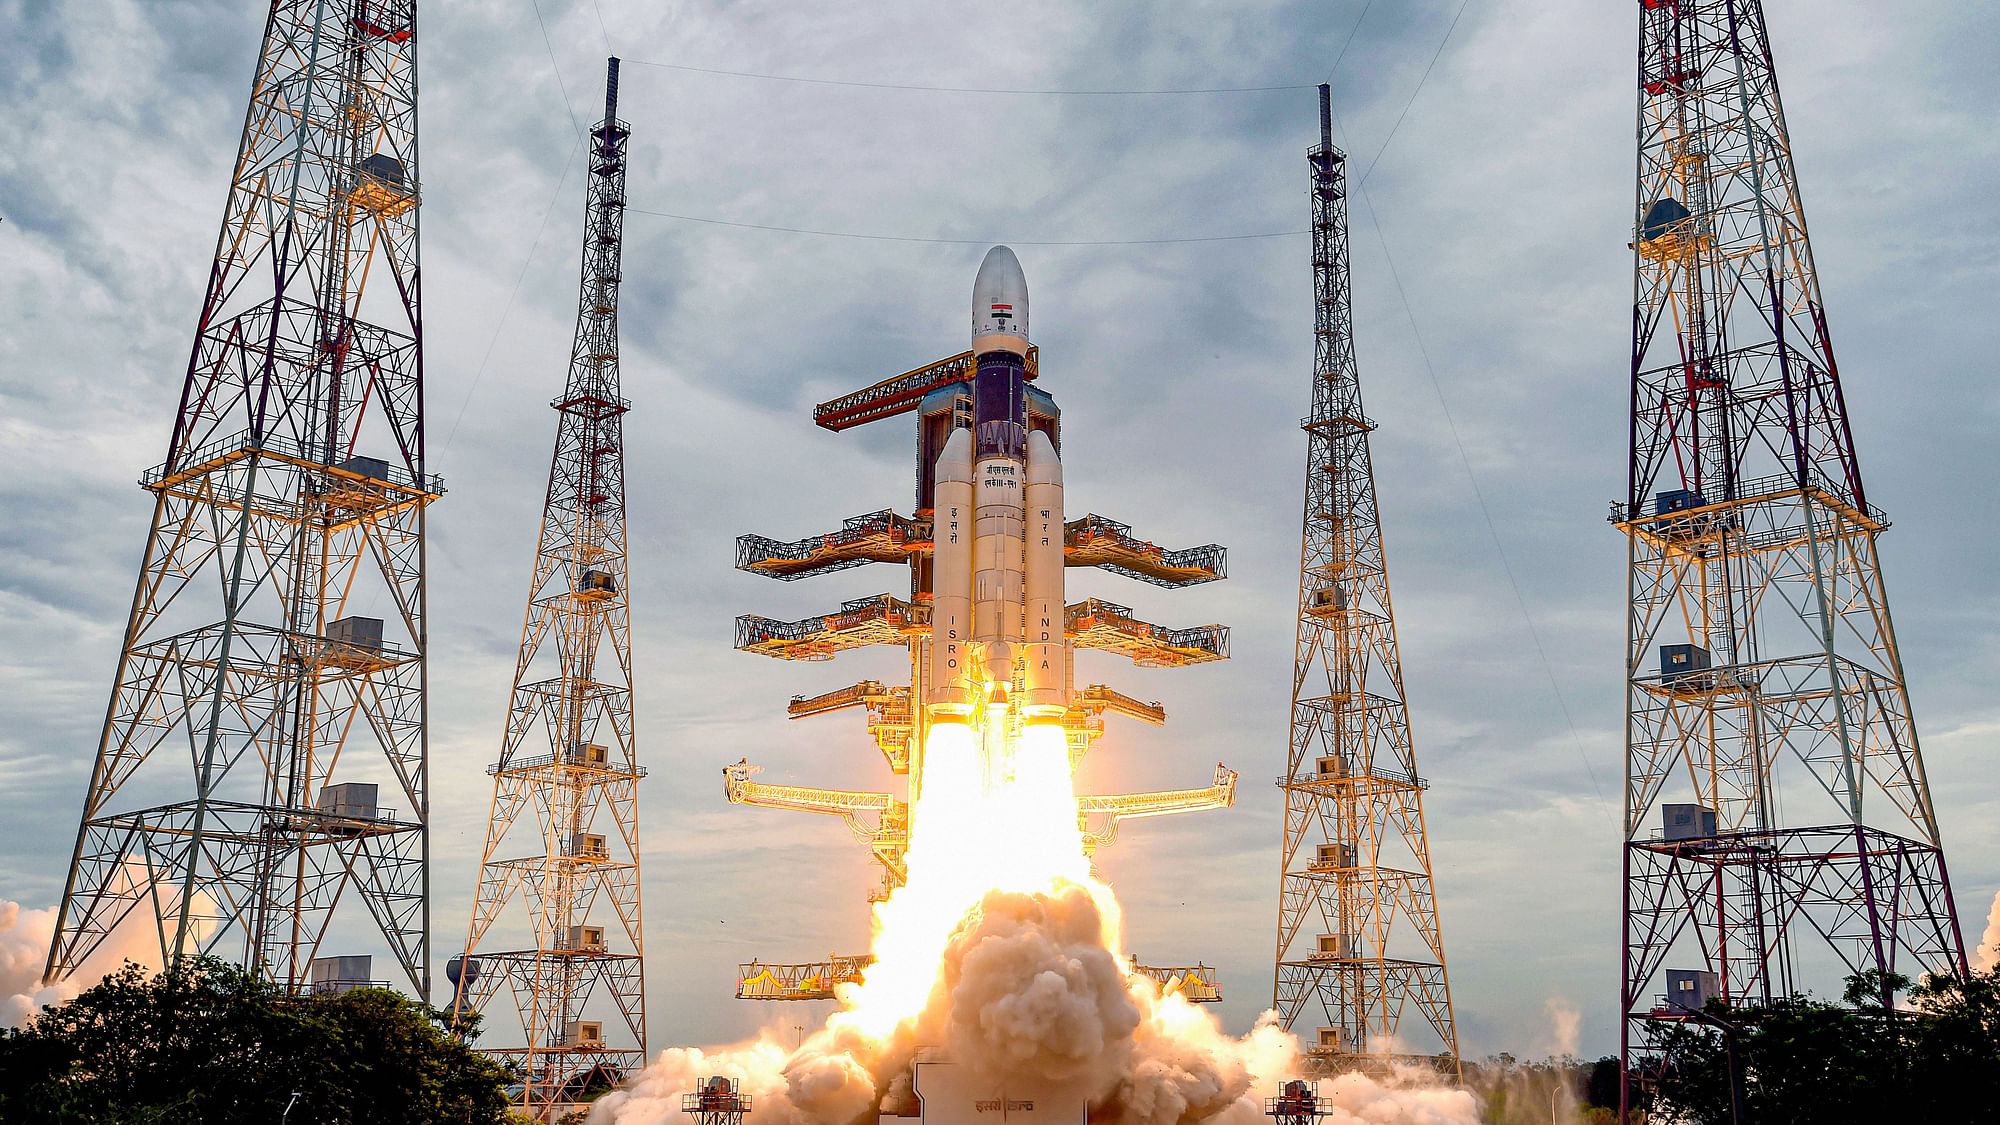 about journey of chandrayaan 3